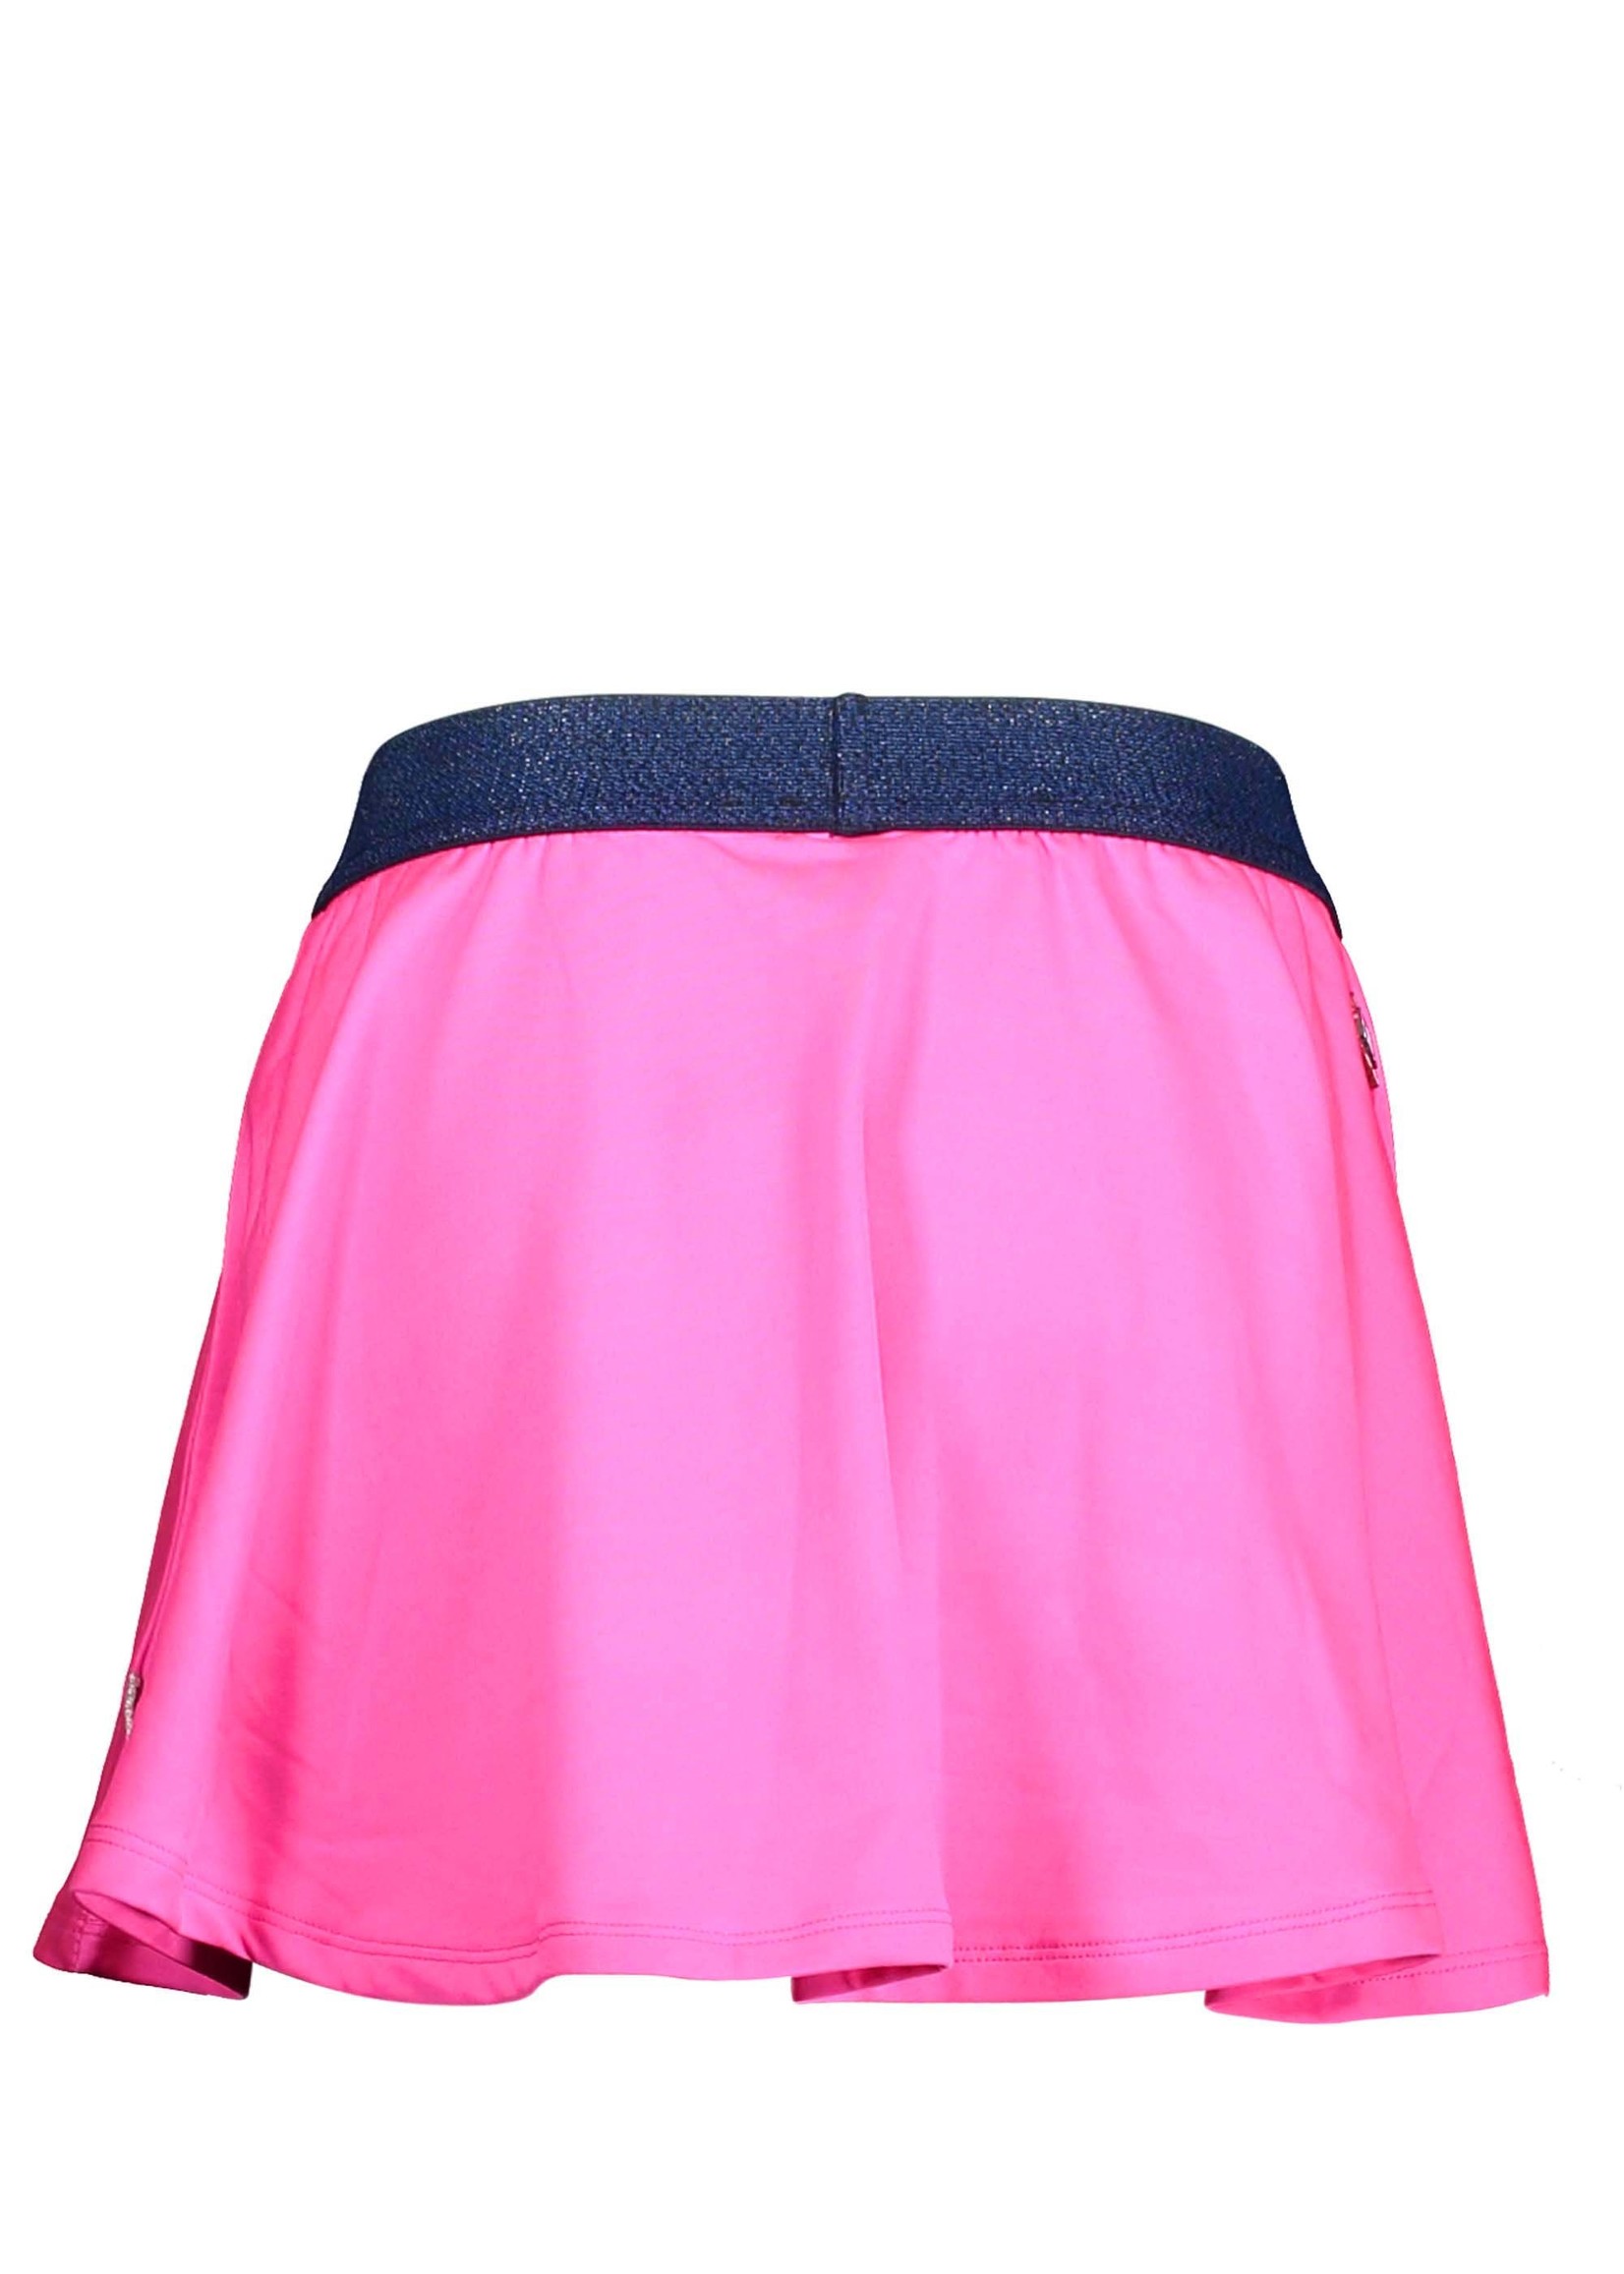 B-Nosy Girls heavy jersey skirt, Knock out pink